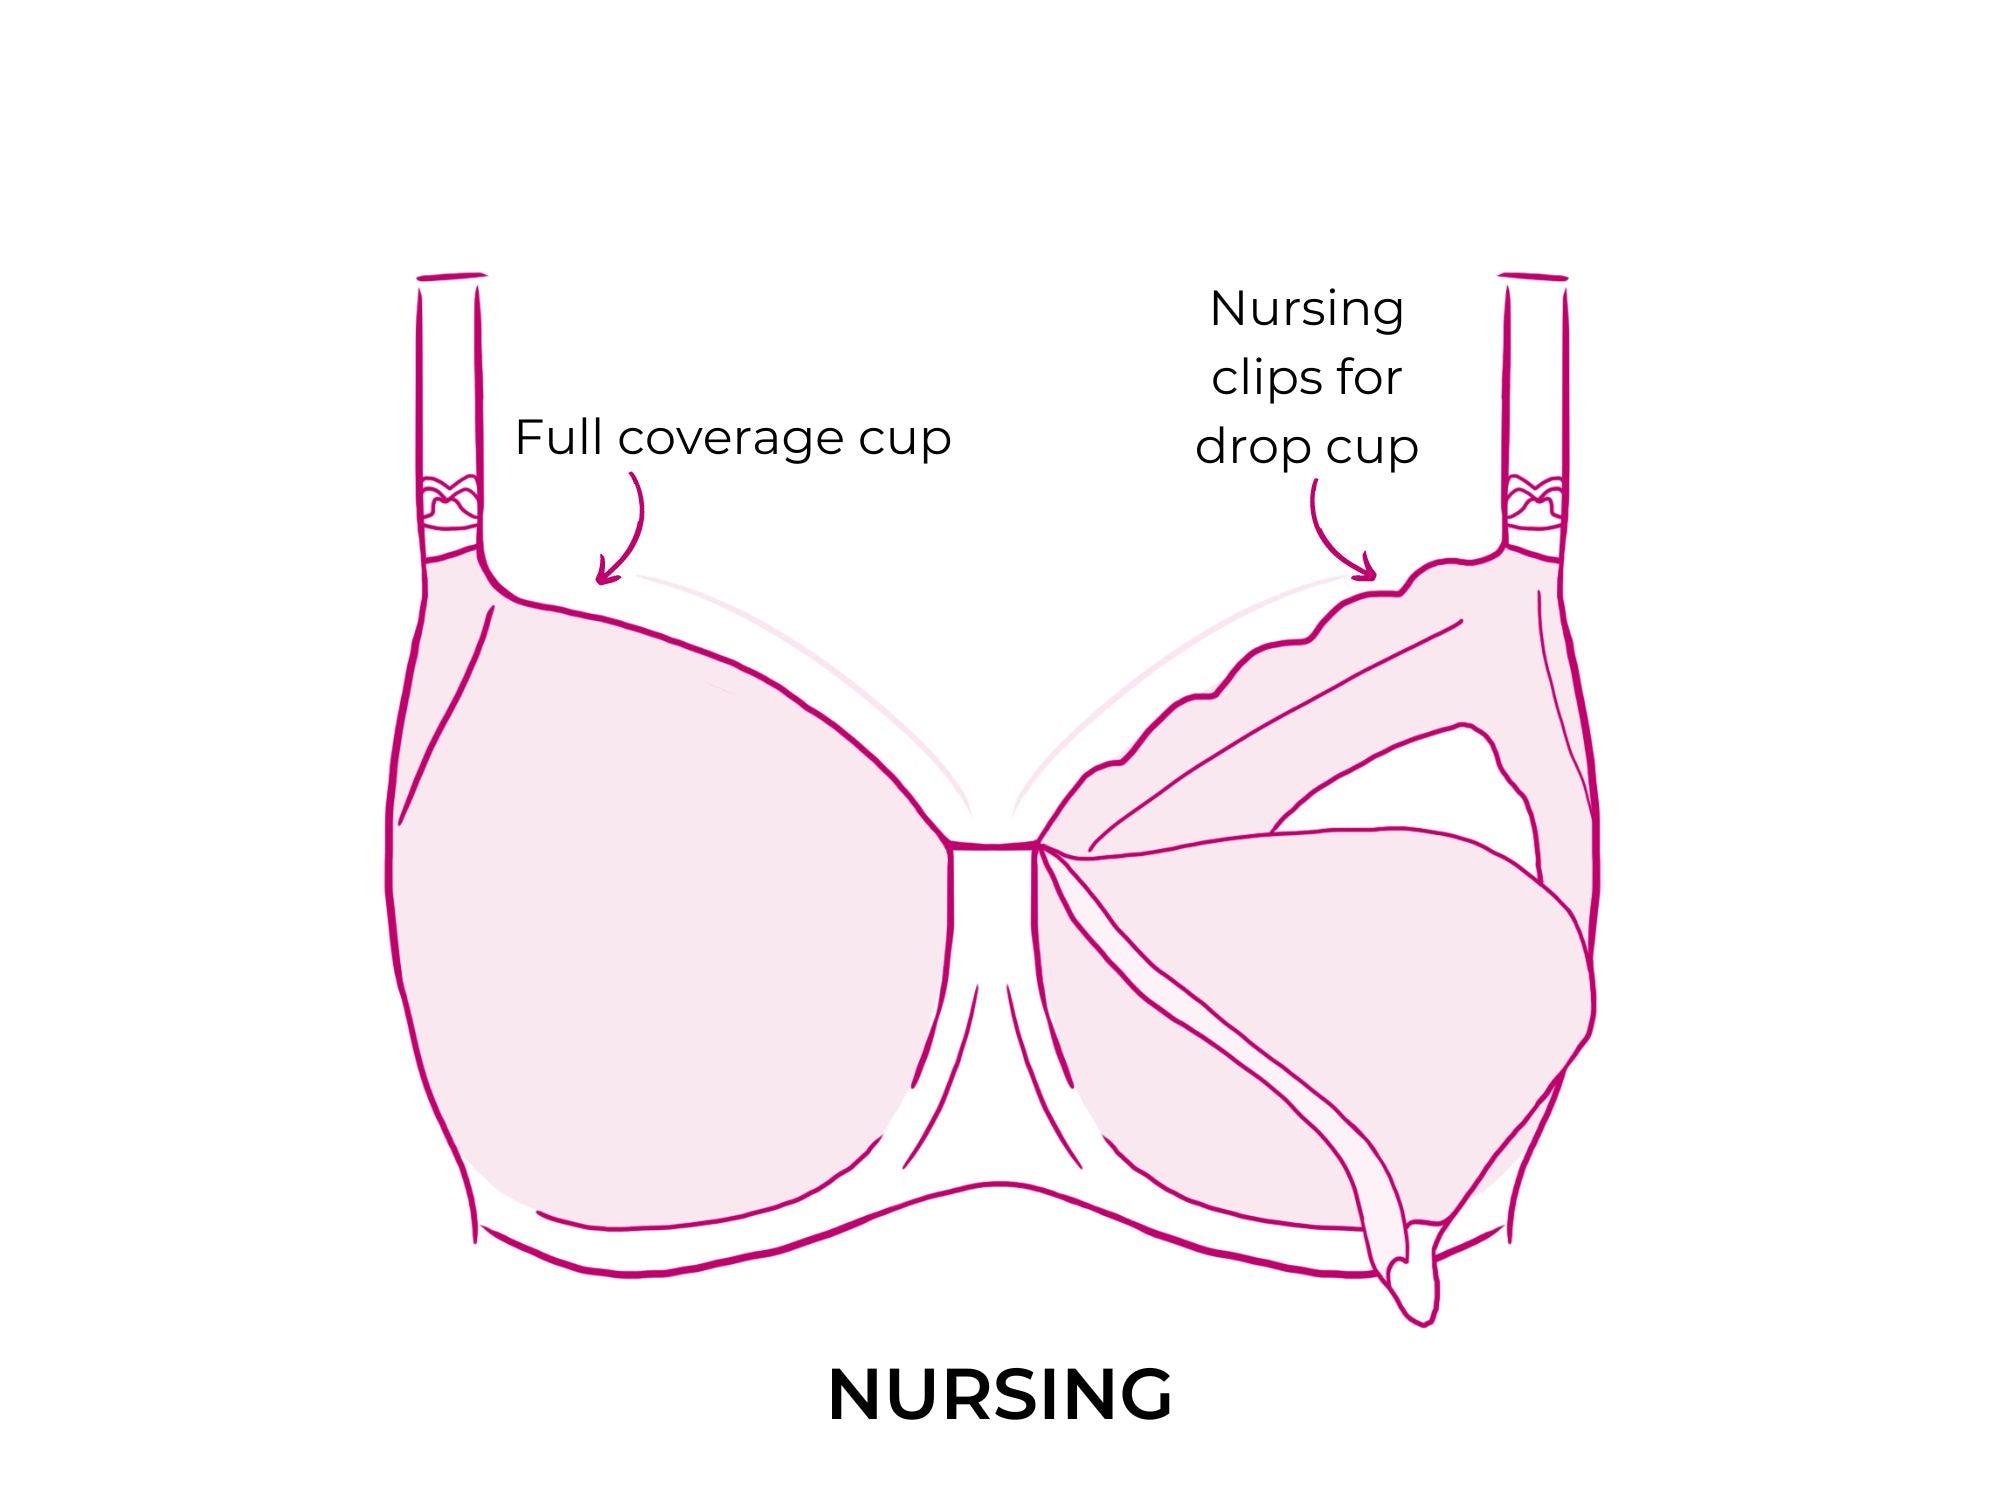 The Journey to the Perfect Breastfeeding Bra